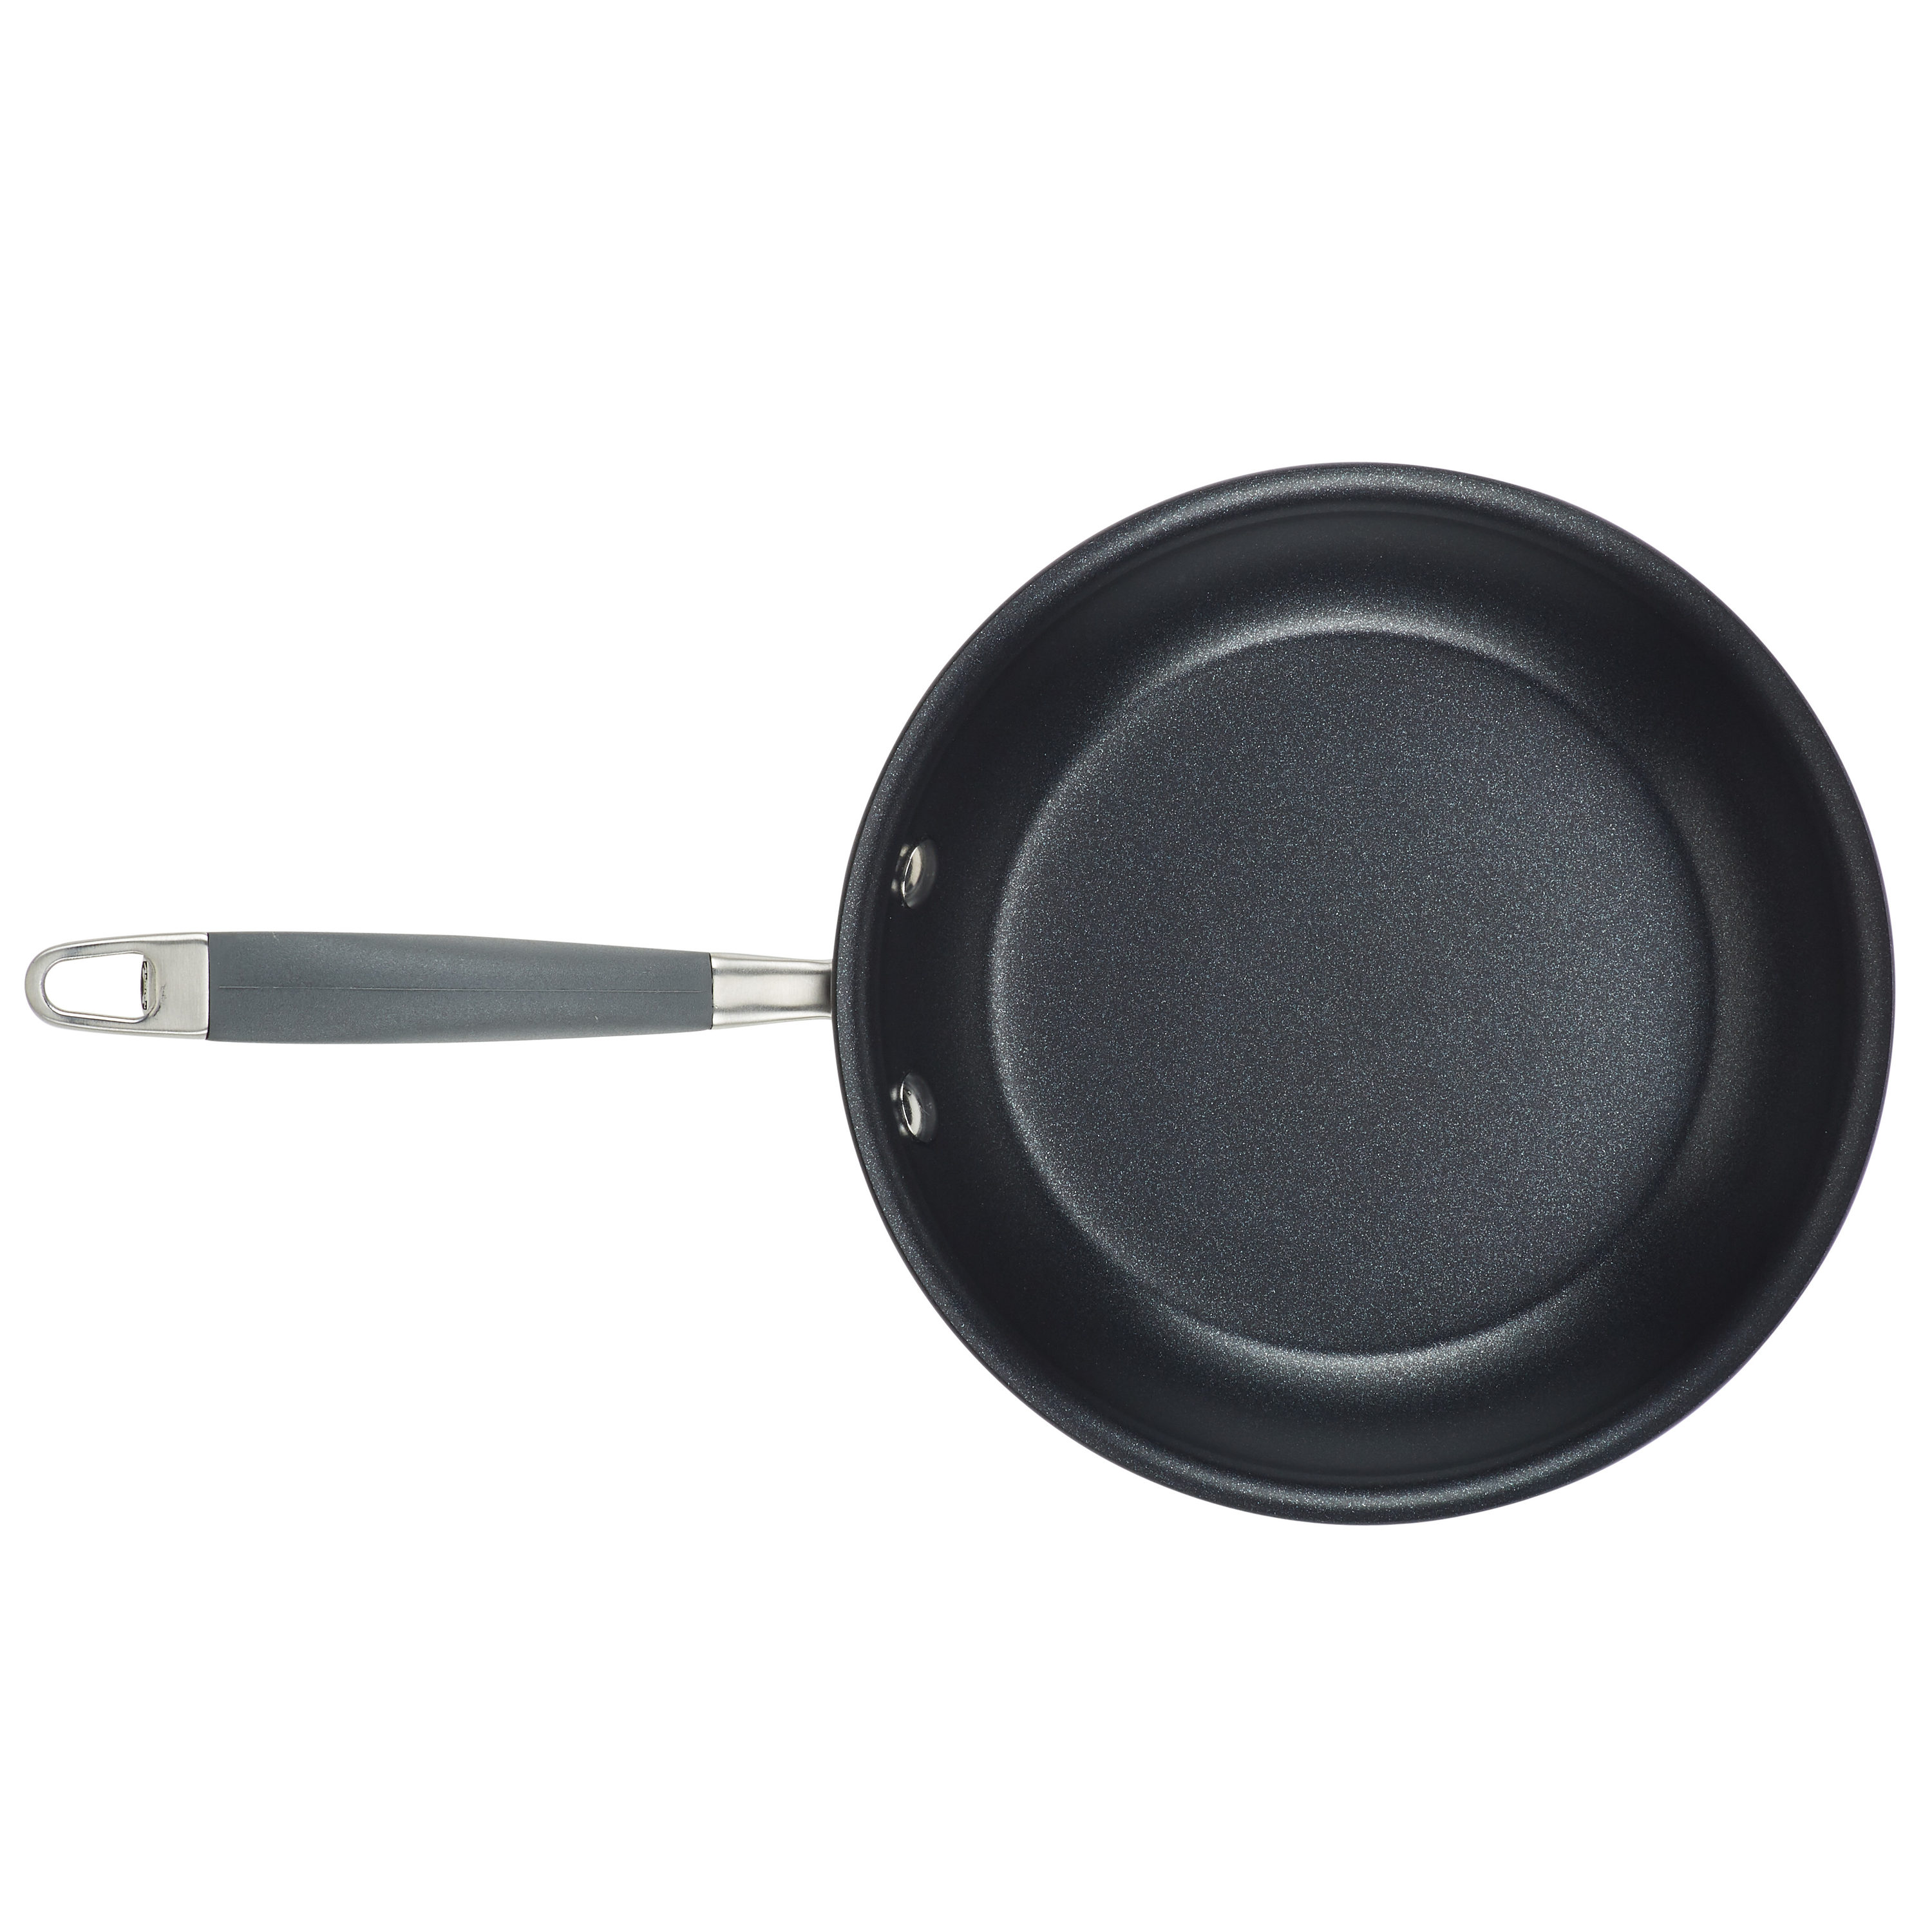 Anolon Advanced Home Hard-Anodized Nonstick Skillet - 8.5 in.